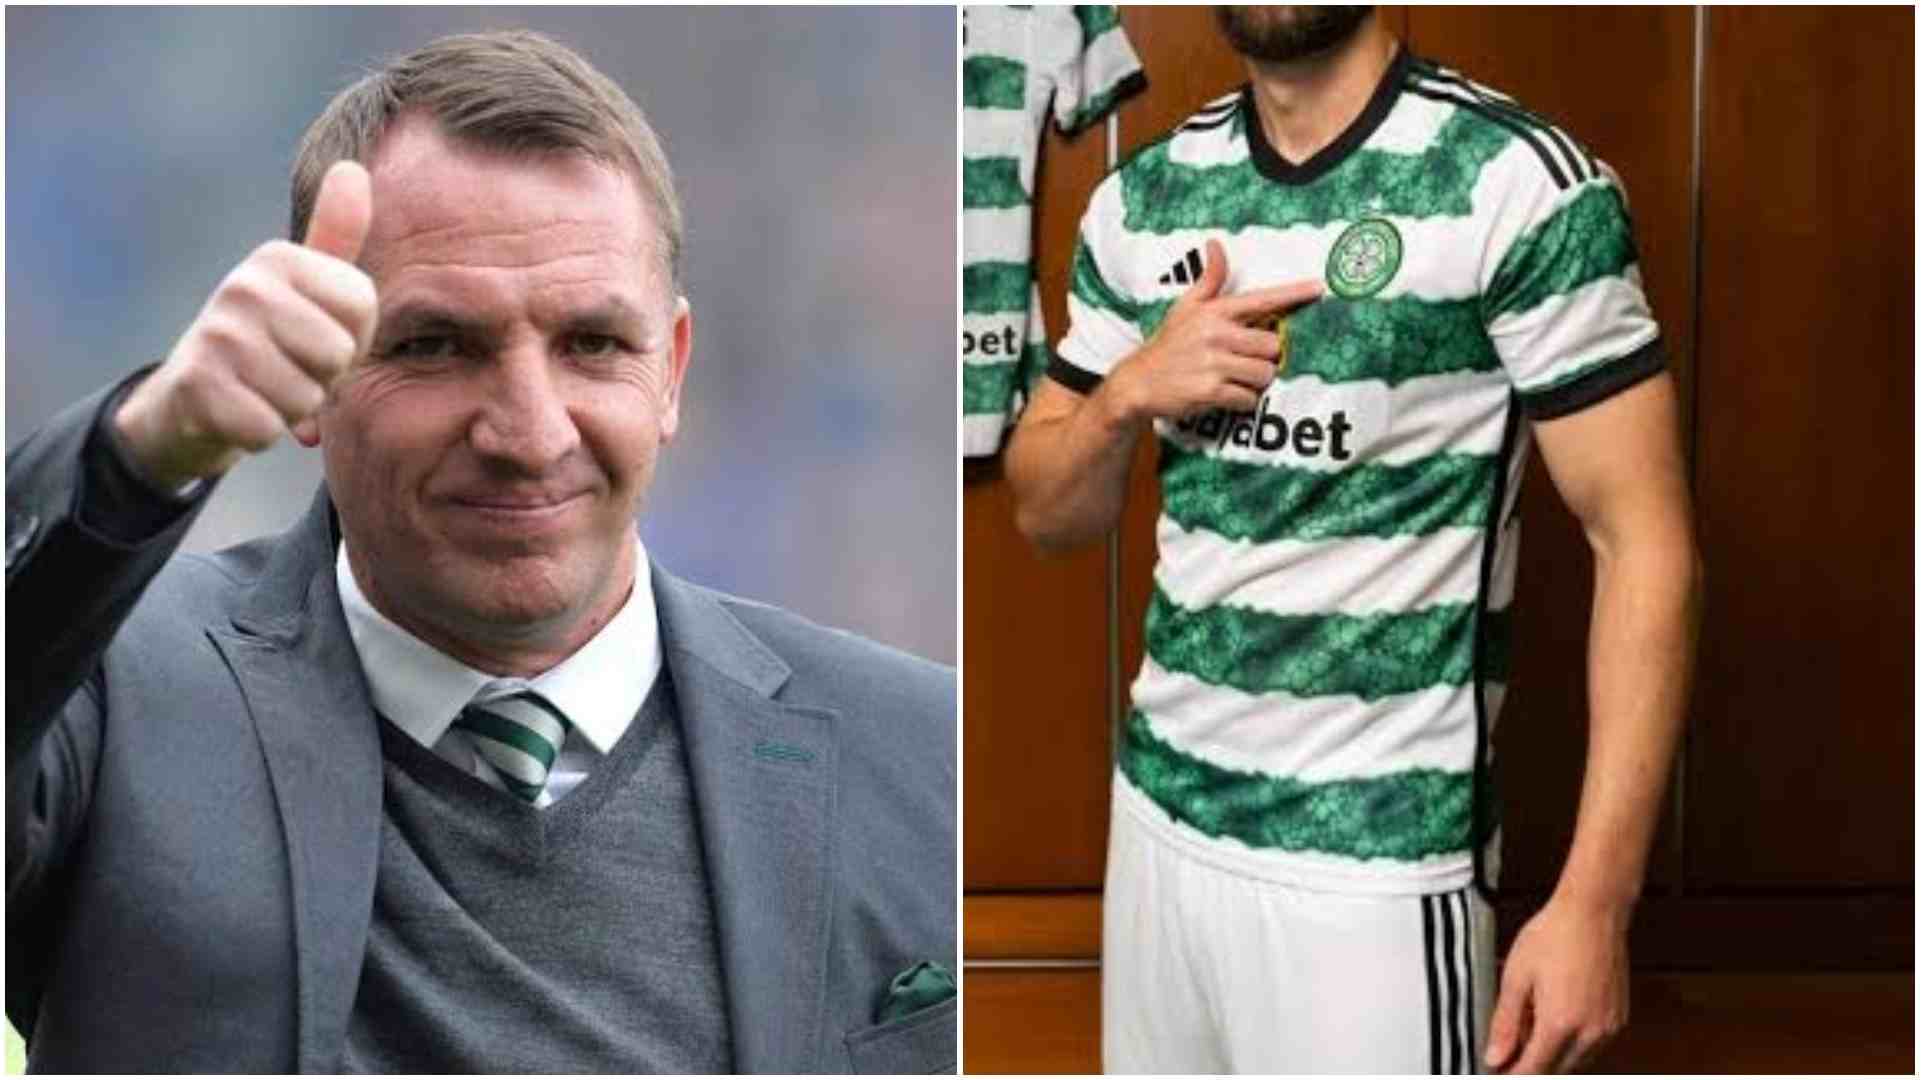 ‘Should Rodgers bring him home?’ Premier League star SPOTTED in Glasgow Green and White NOW likely to make EXIT from Club as per ‘The Athletic’